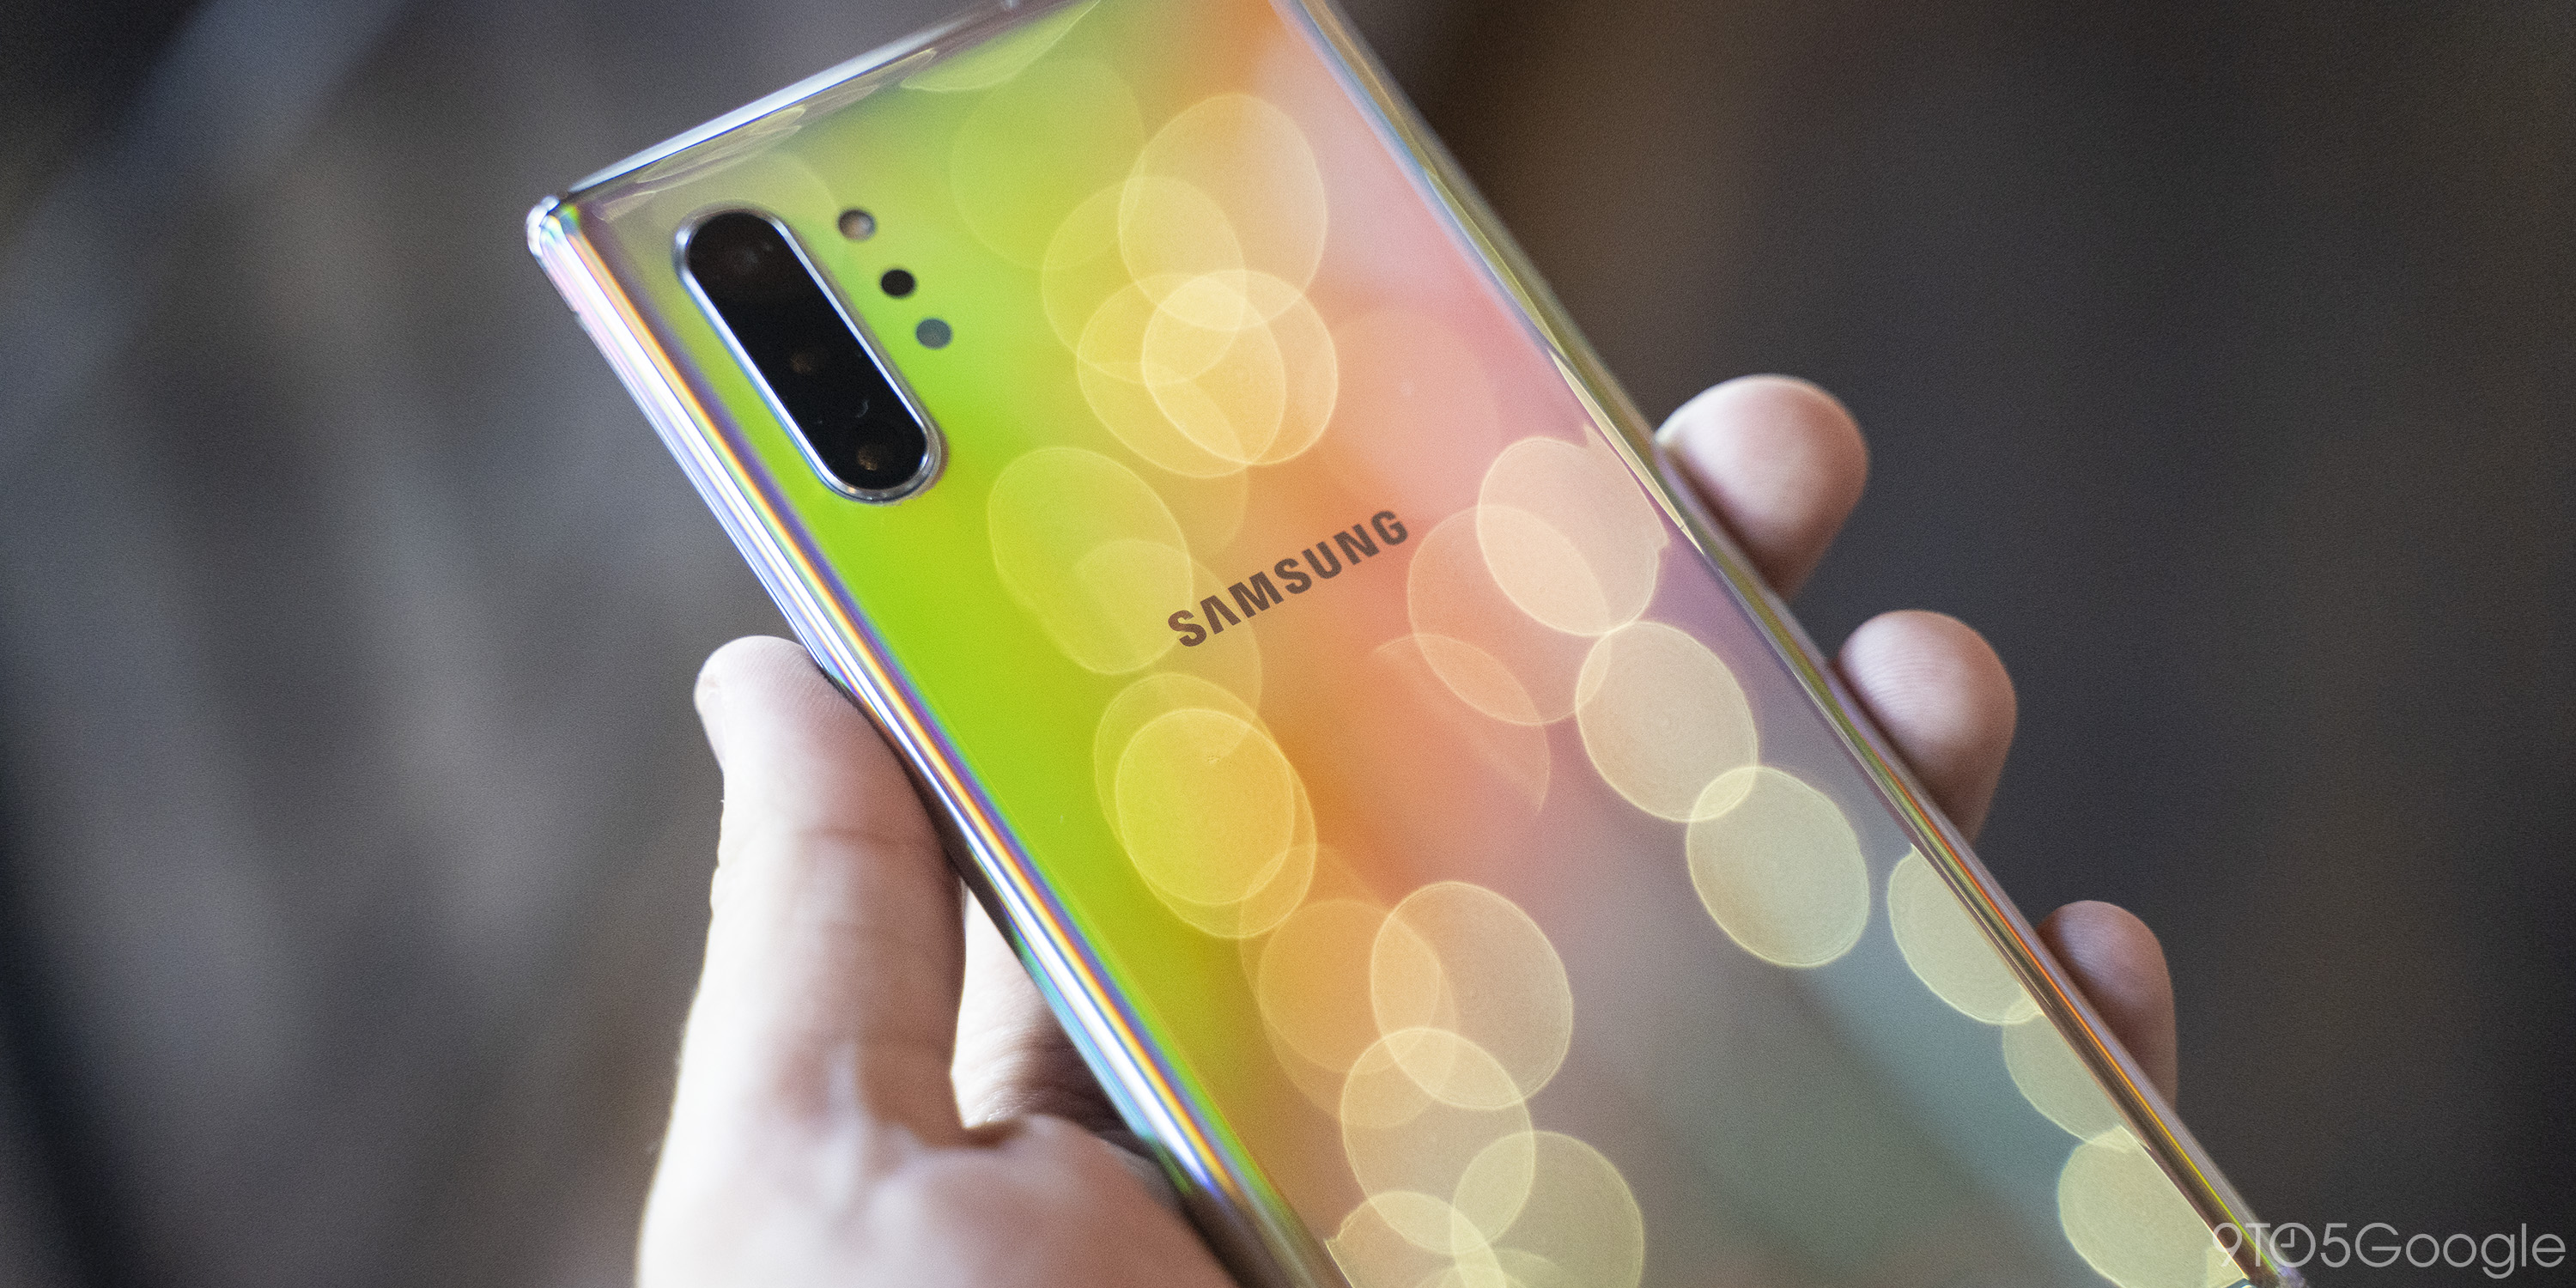 Galaxy Note 10 vs. S10: Honestly, we don't think the S Pen is